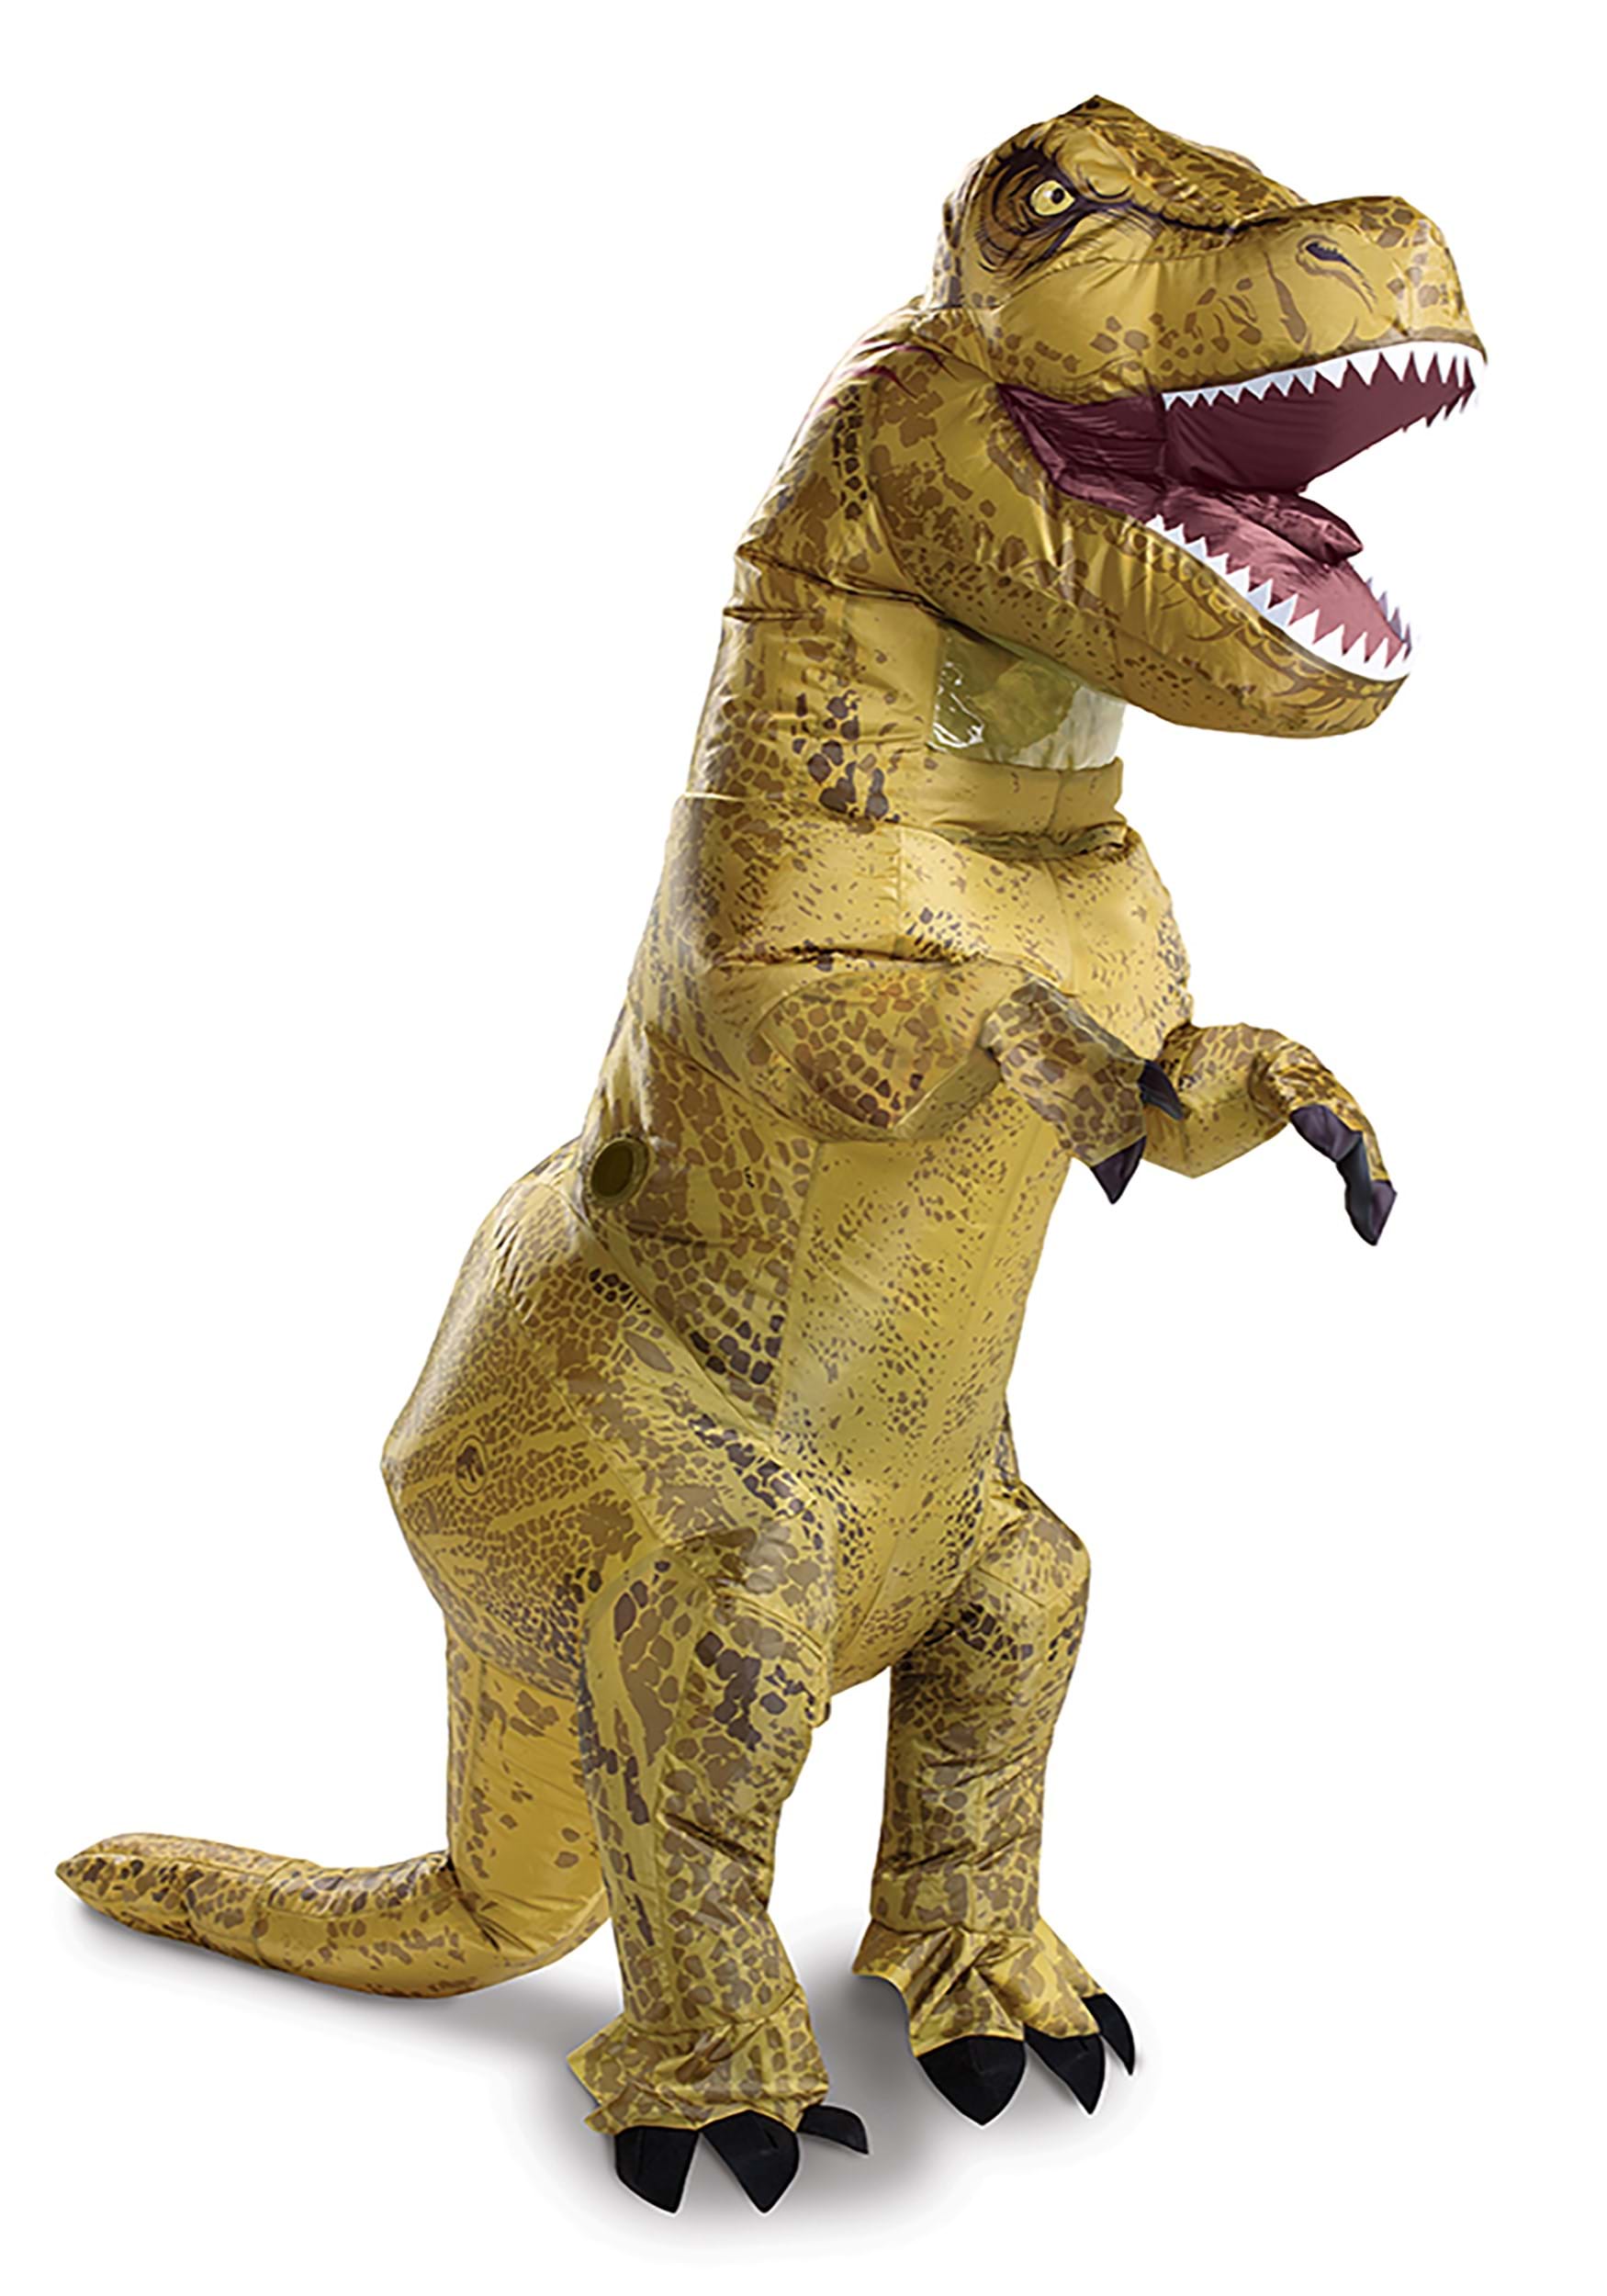 Adult Jurassic World Inflatable T-Rex Costume | Inflatable Costumes